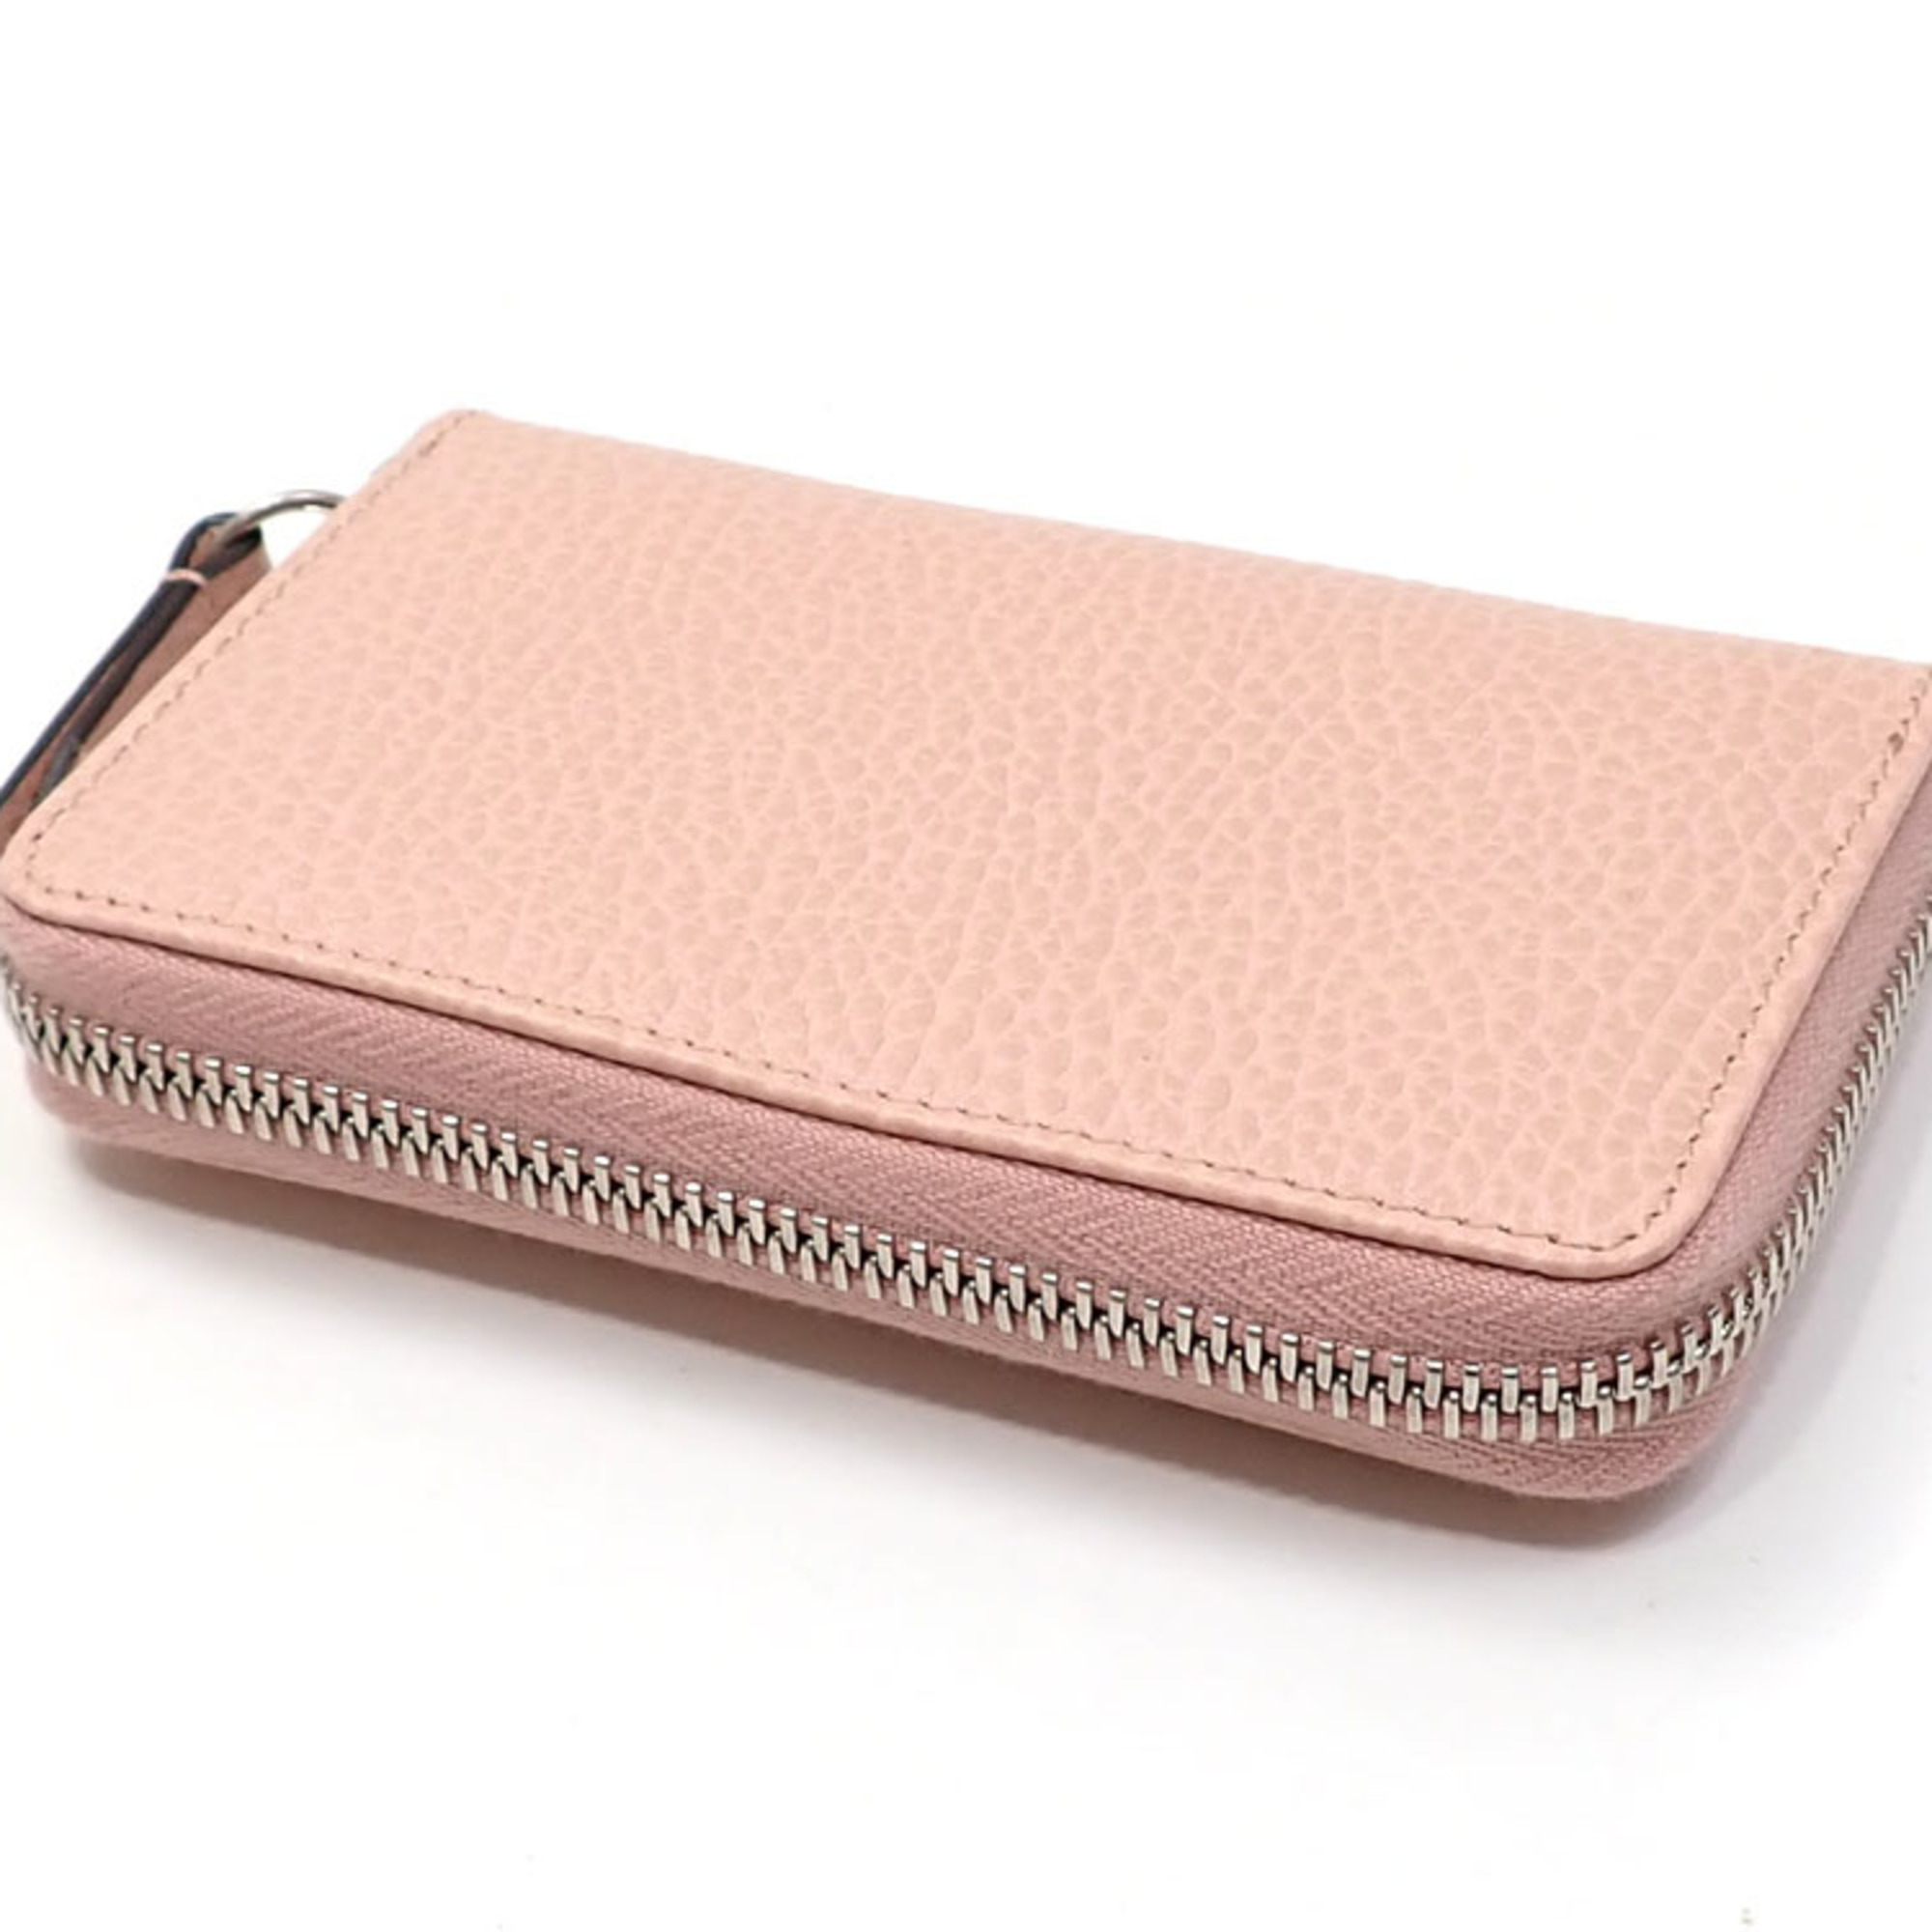 Gucci Coin Case and Card Double G Zip Around Wallet for Women Pink Leather 644412 Purse